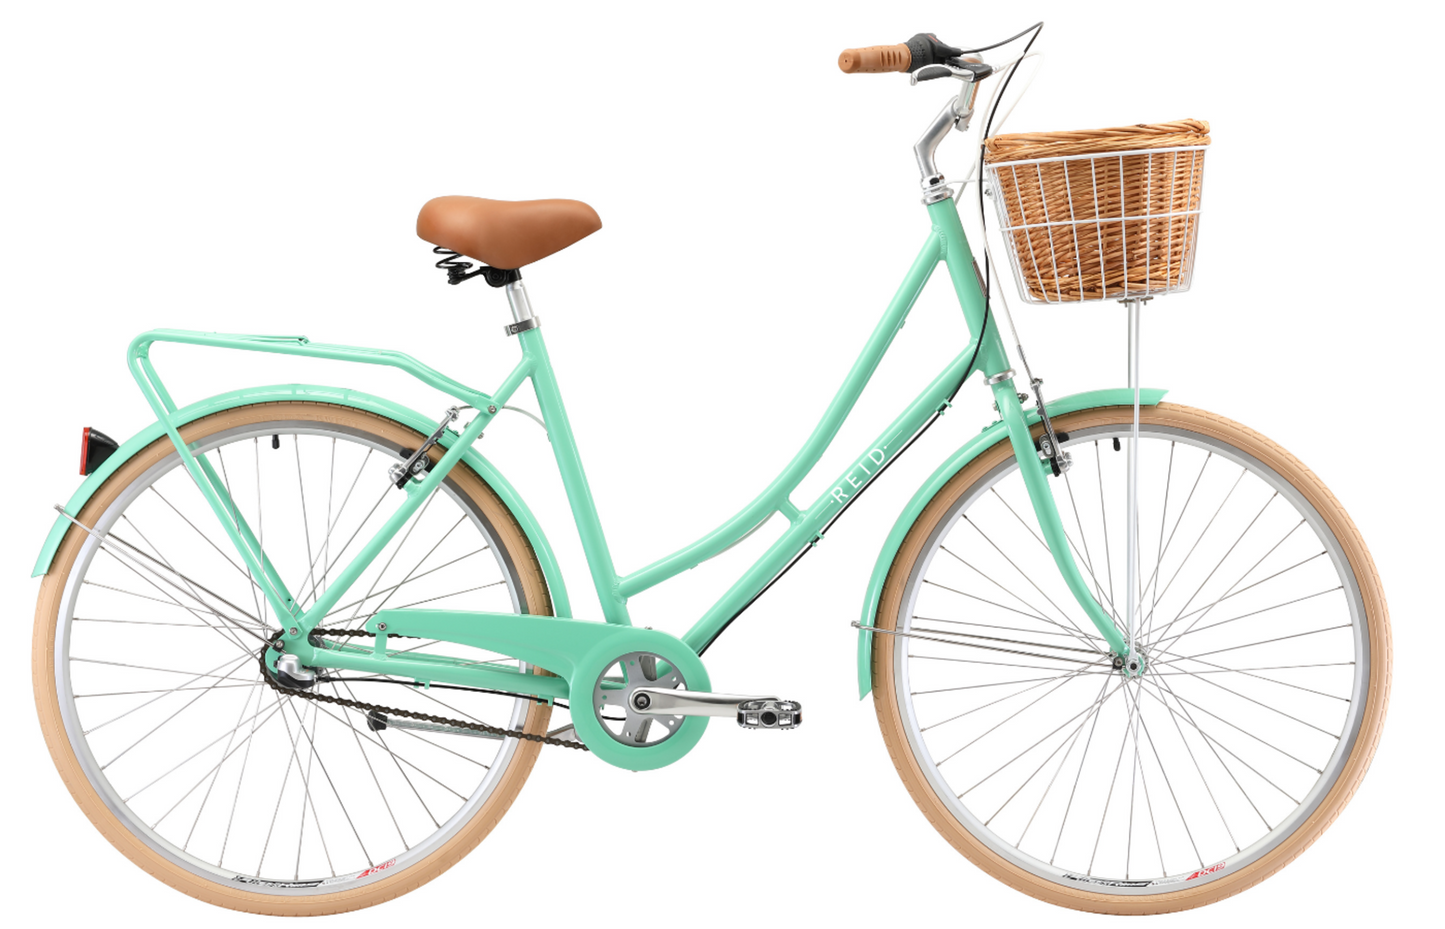 Ladies Deluxe Vintage Bike in Mint Green with 3-speed Shimano gearing from Reid Cycles Australia